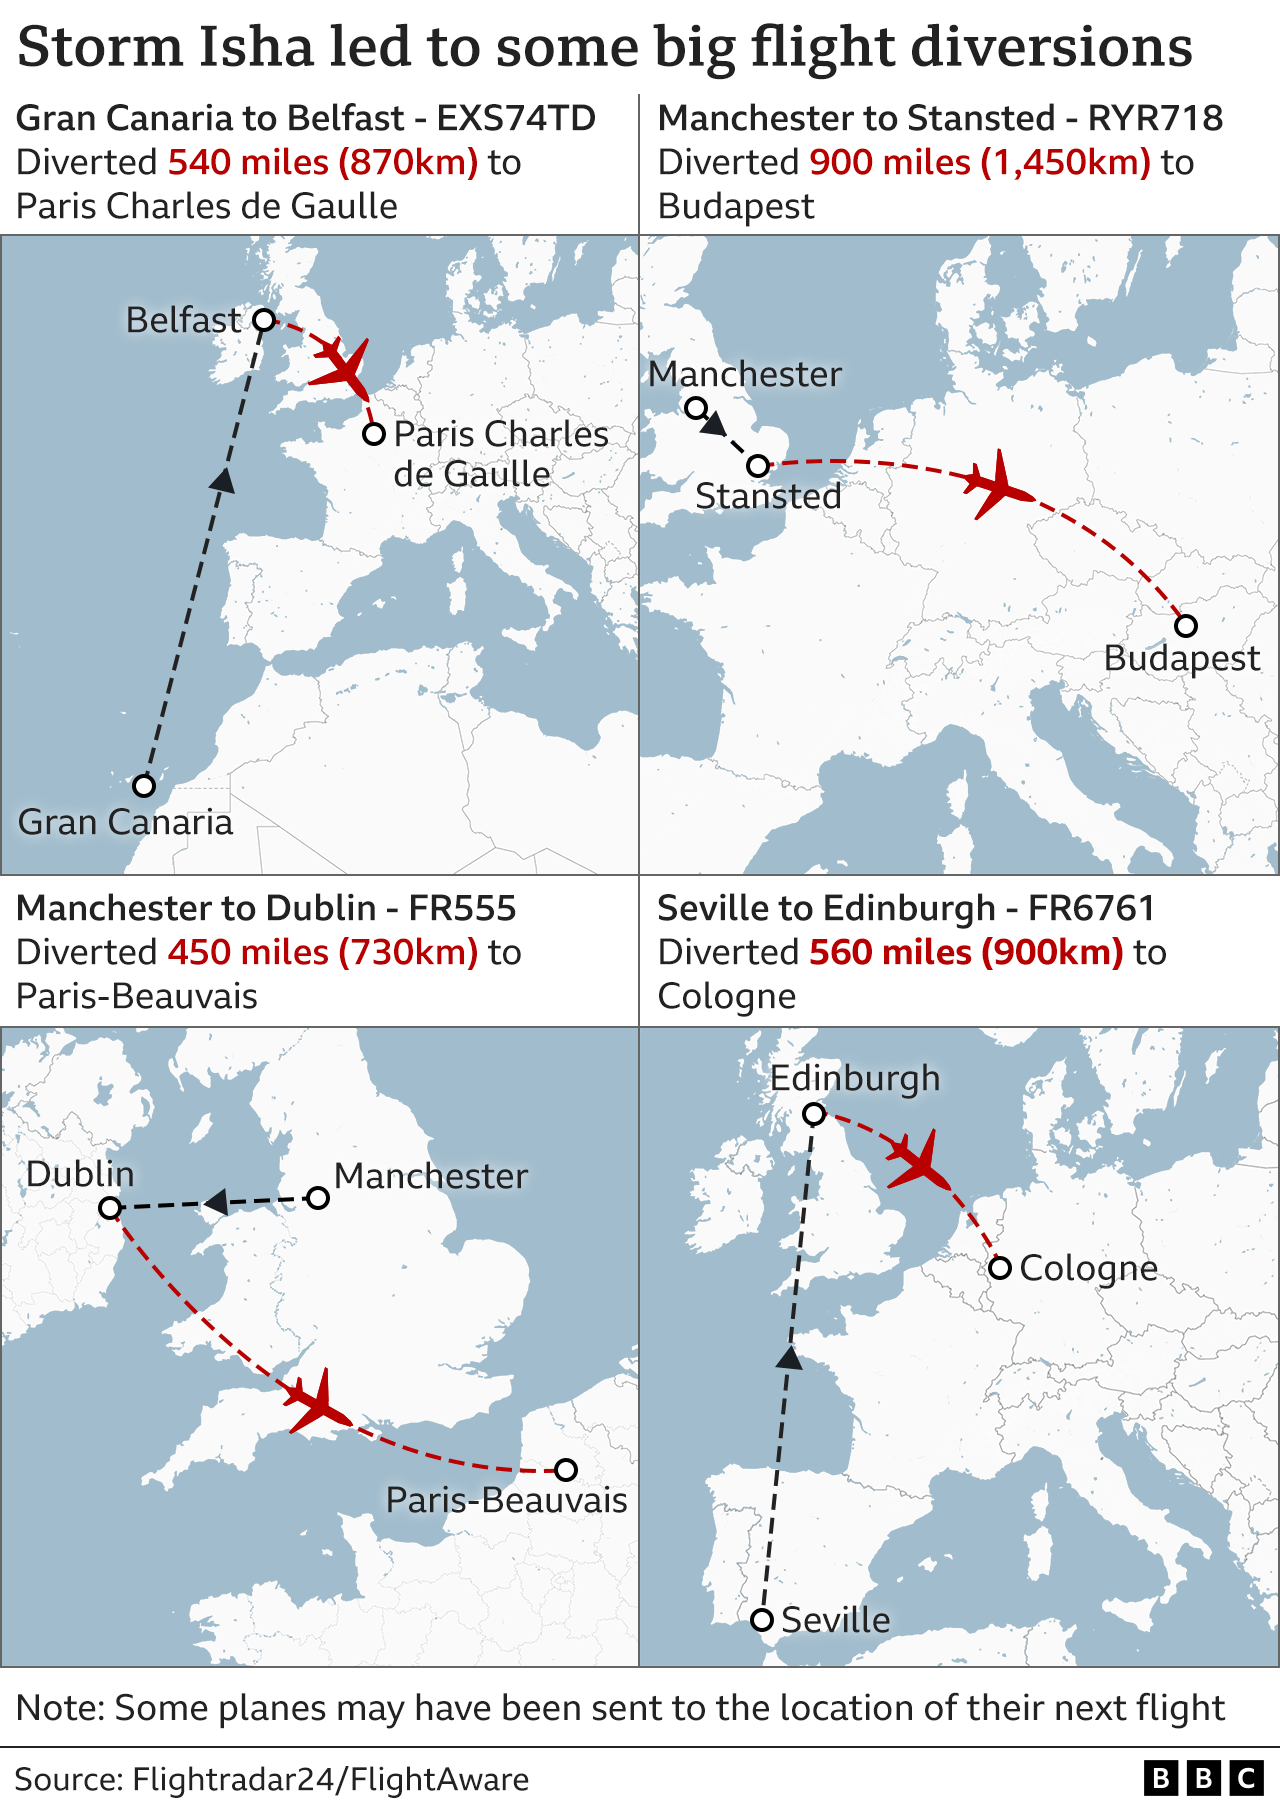 Four maps show the paths of four diverted flights